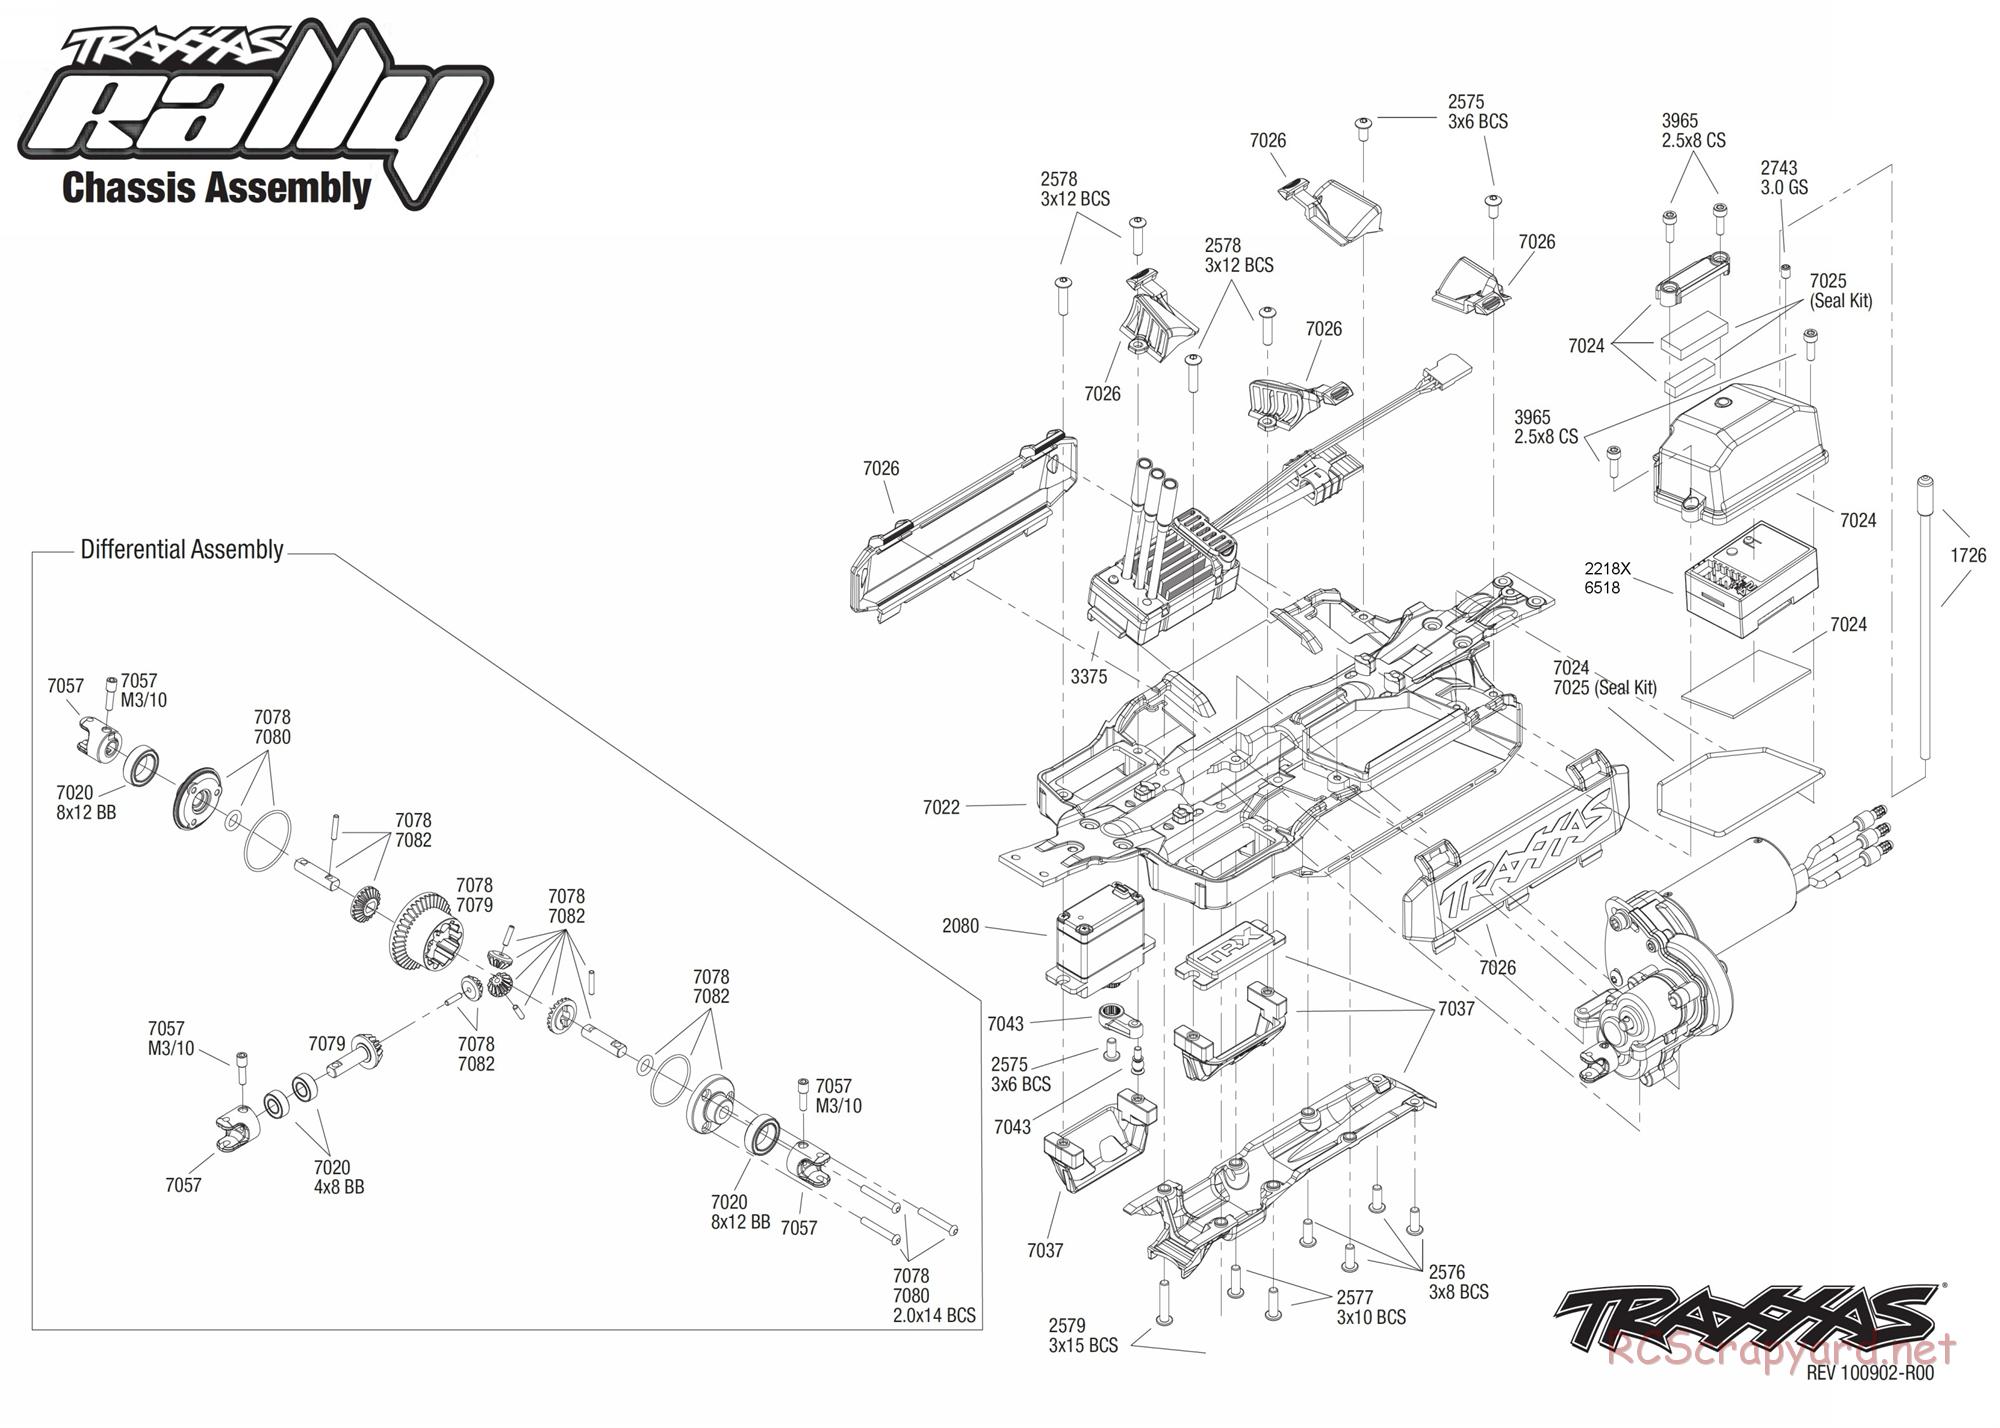 Traxxas - 1/16 Rally VXL (2010) - Exploded Views - Page 1